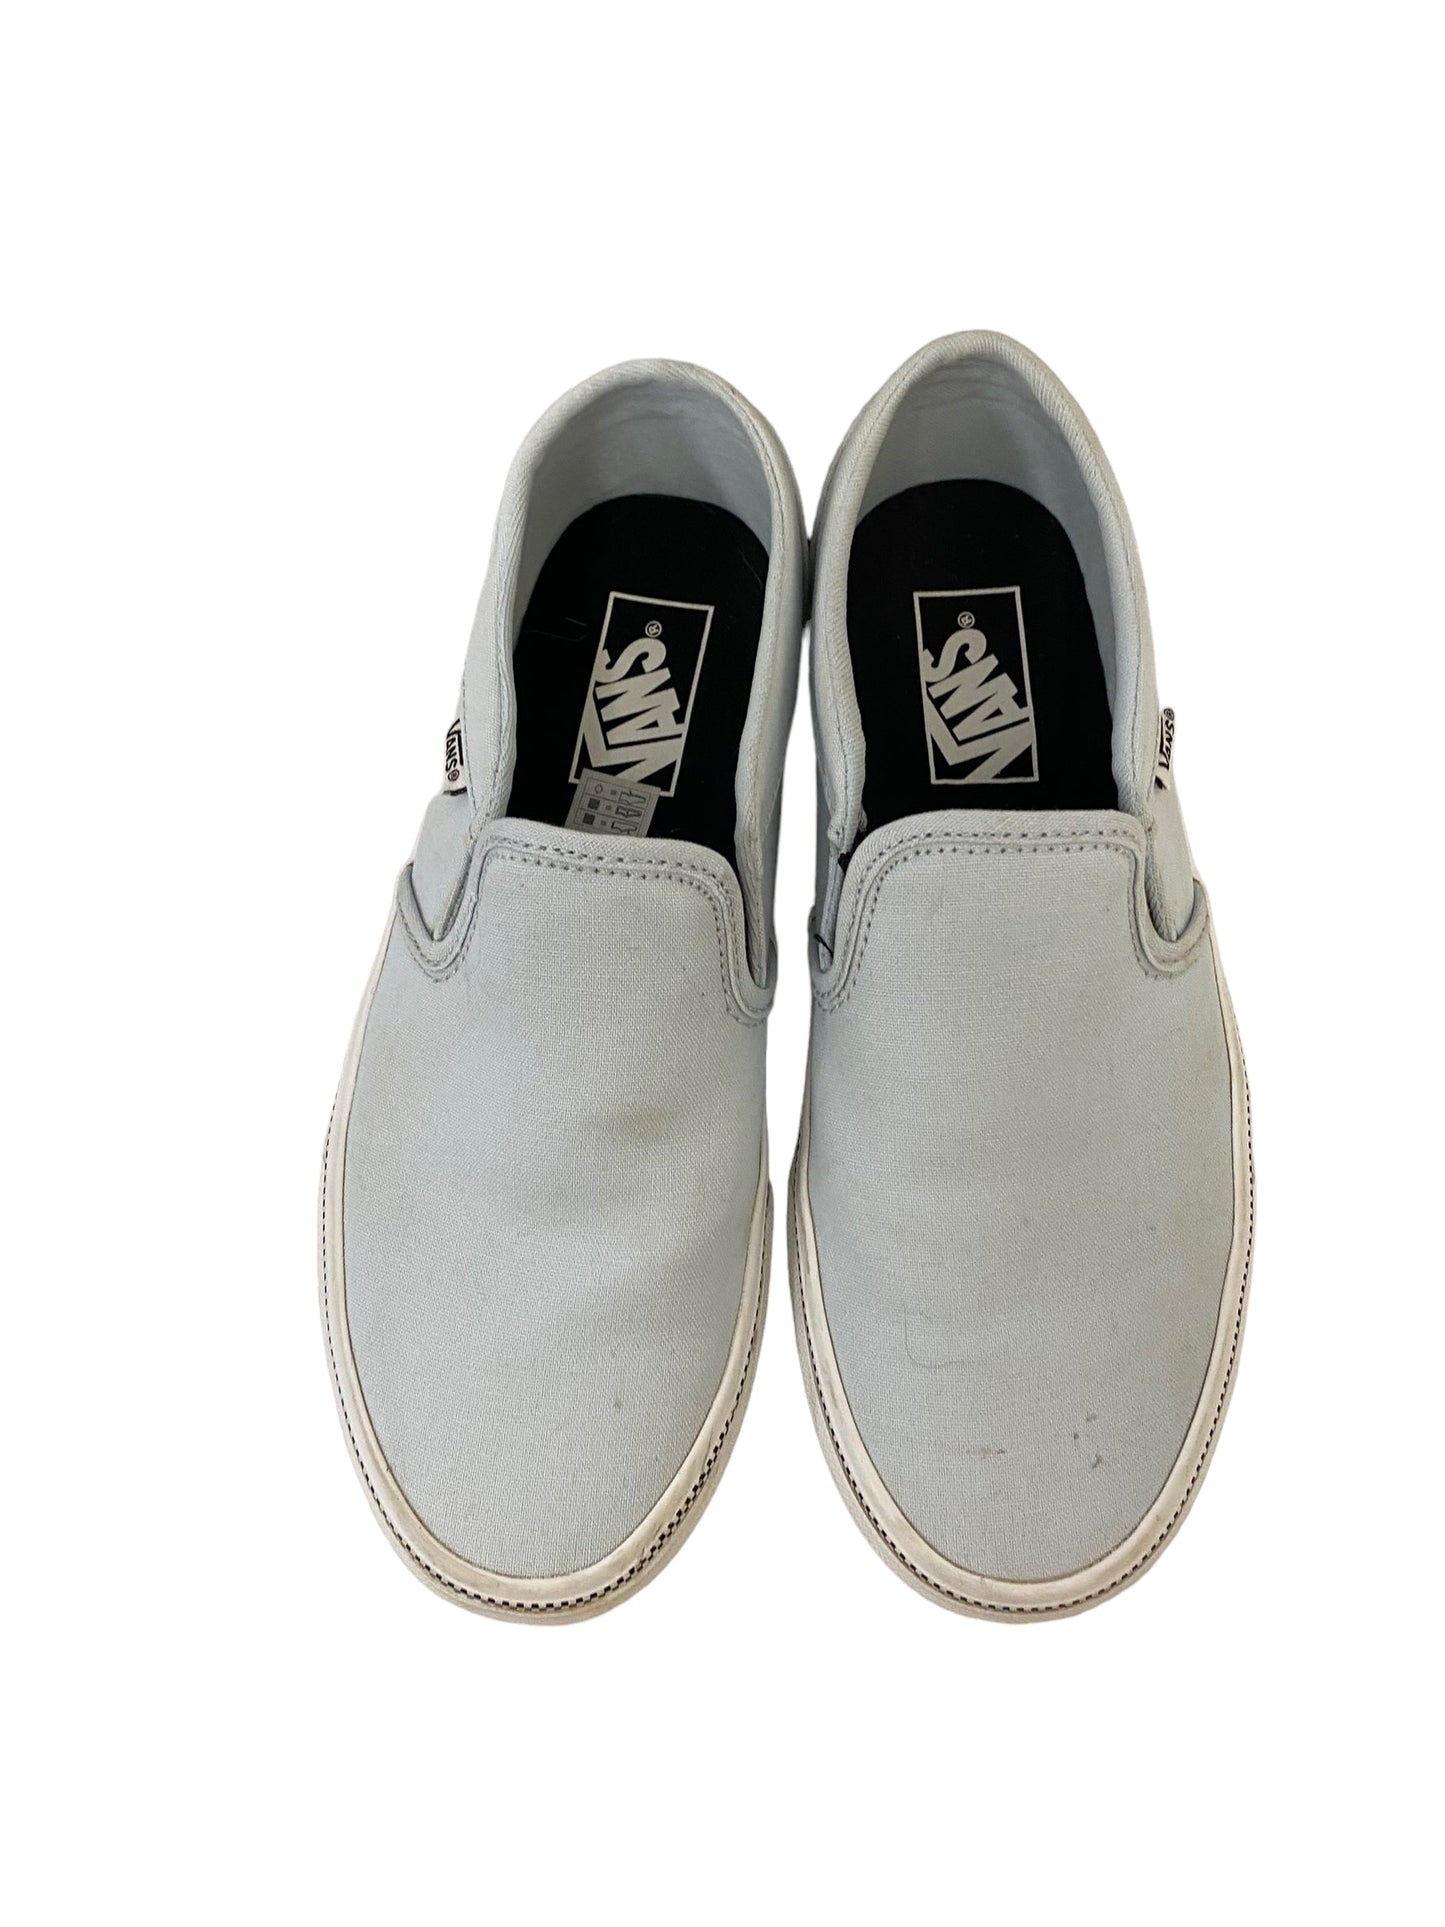 Shoes Flats Boat By Vans  Size: 7.5